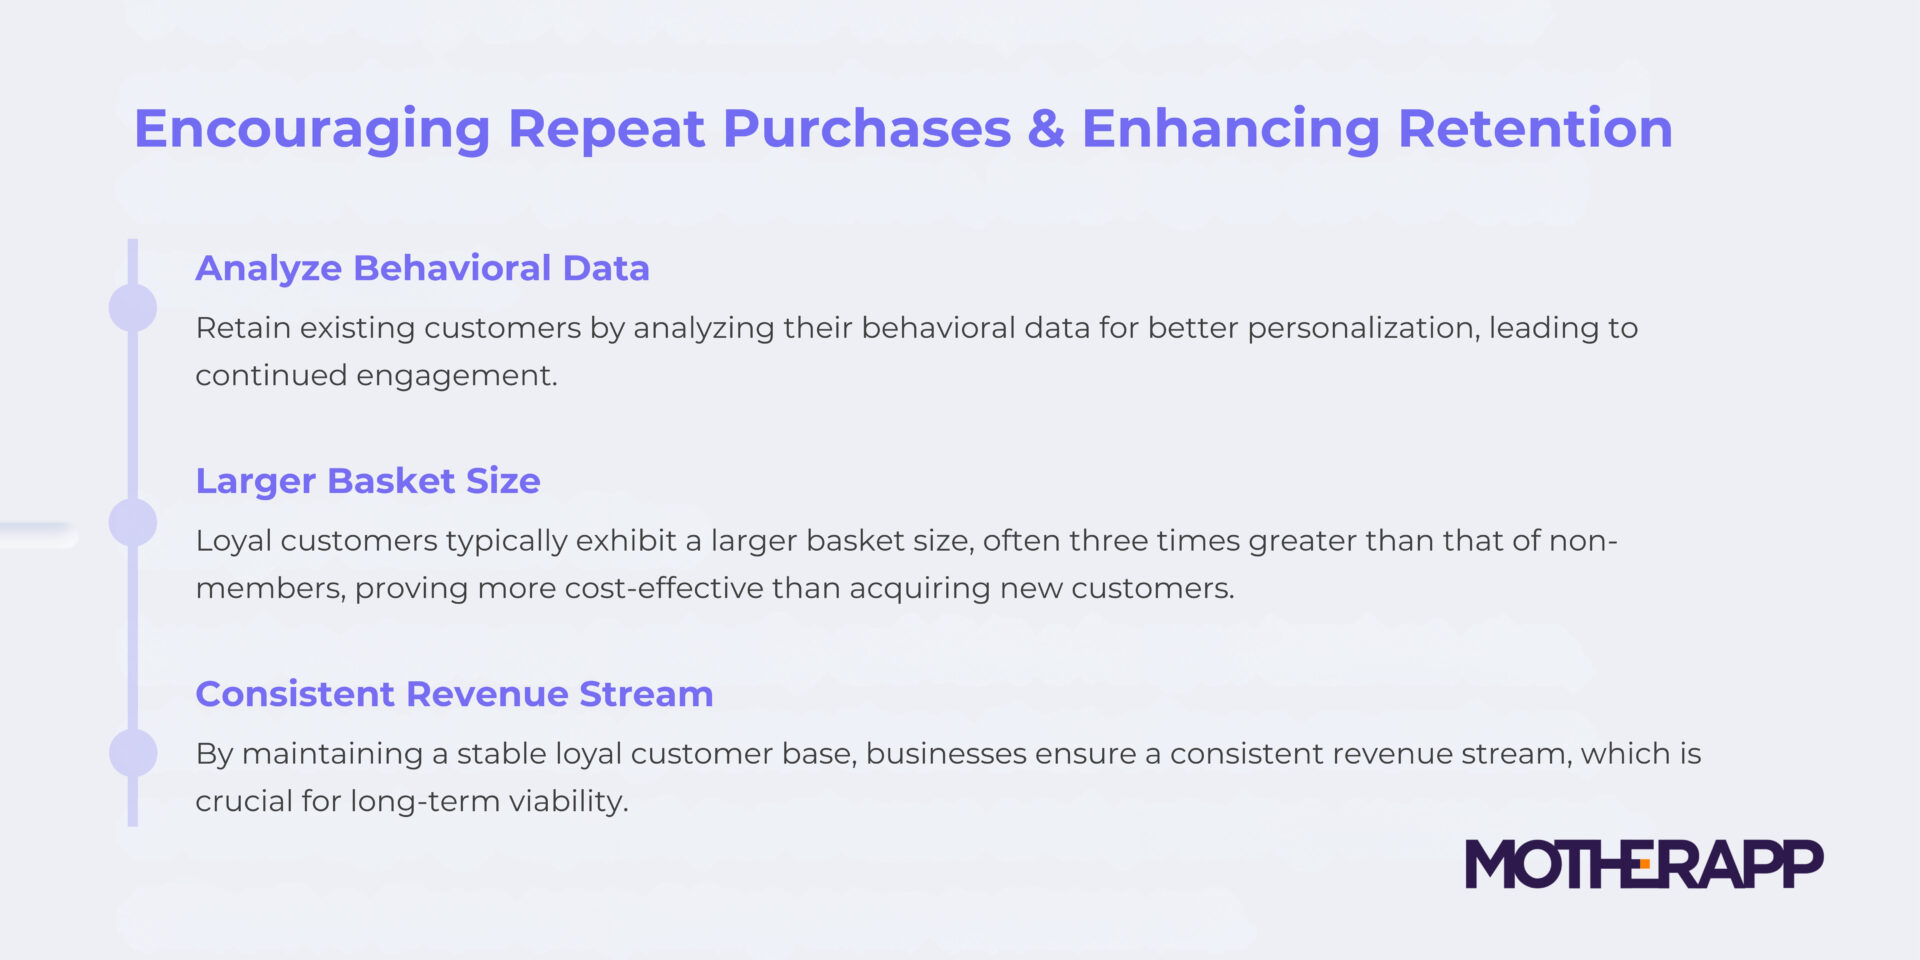 Encouraging Repeat Purchases and Enhancing Retention